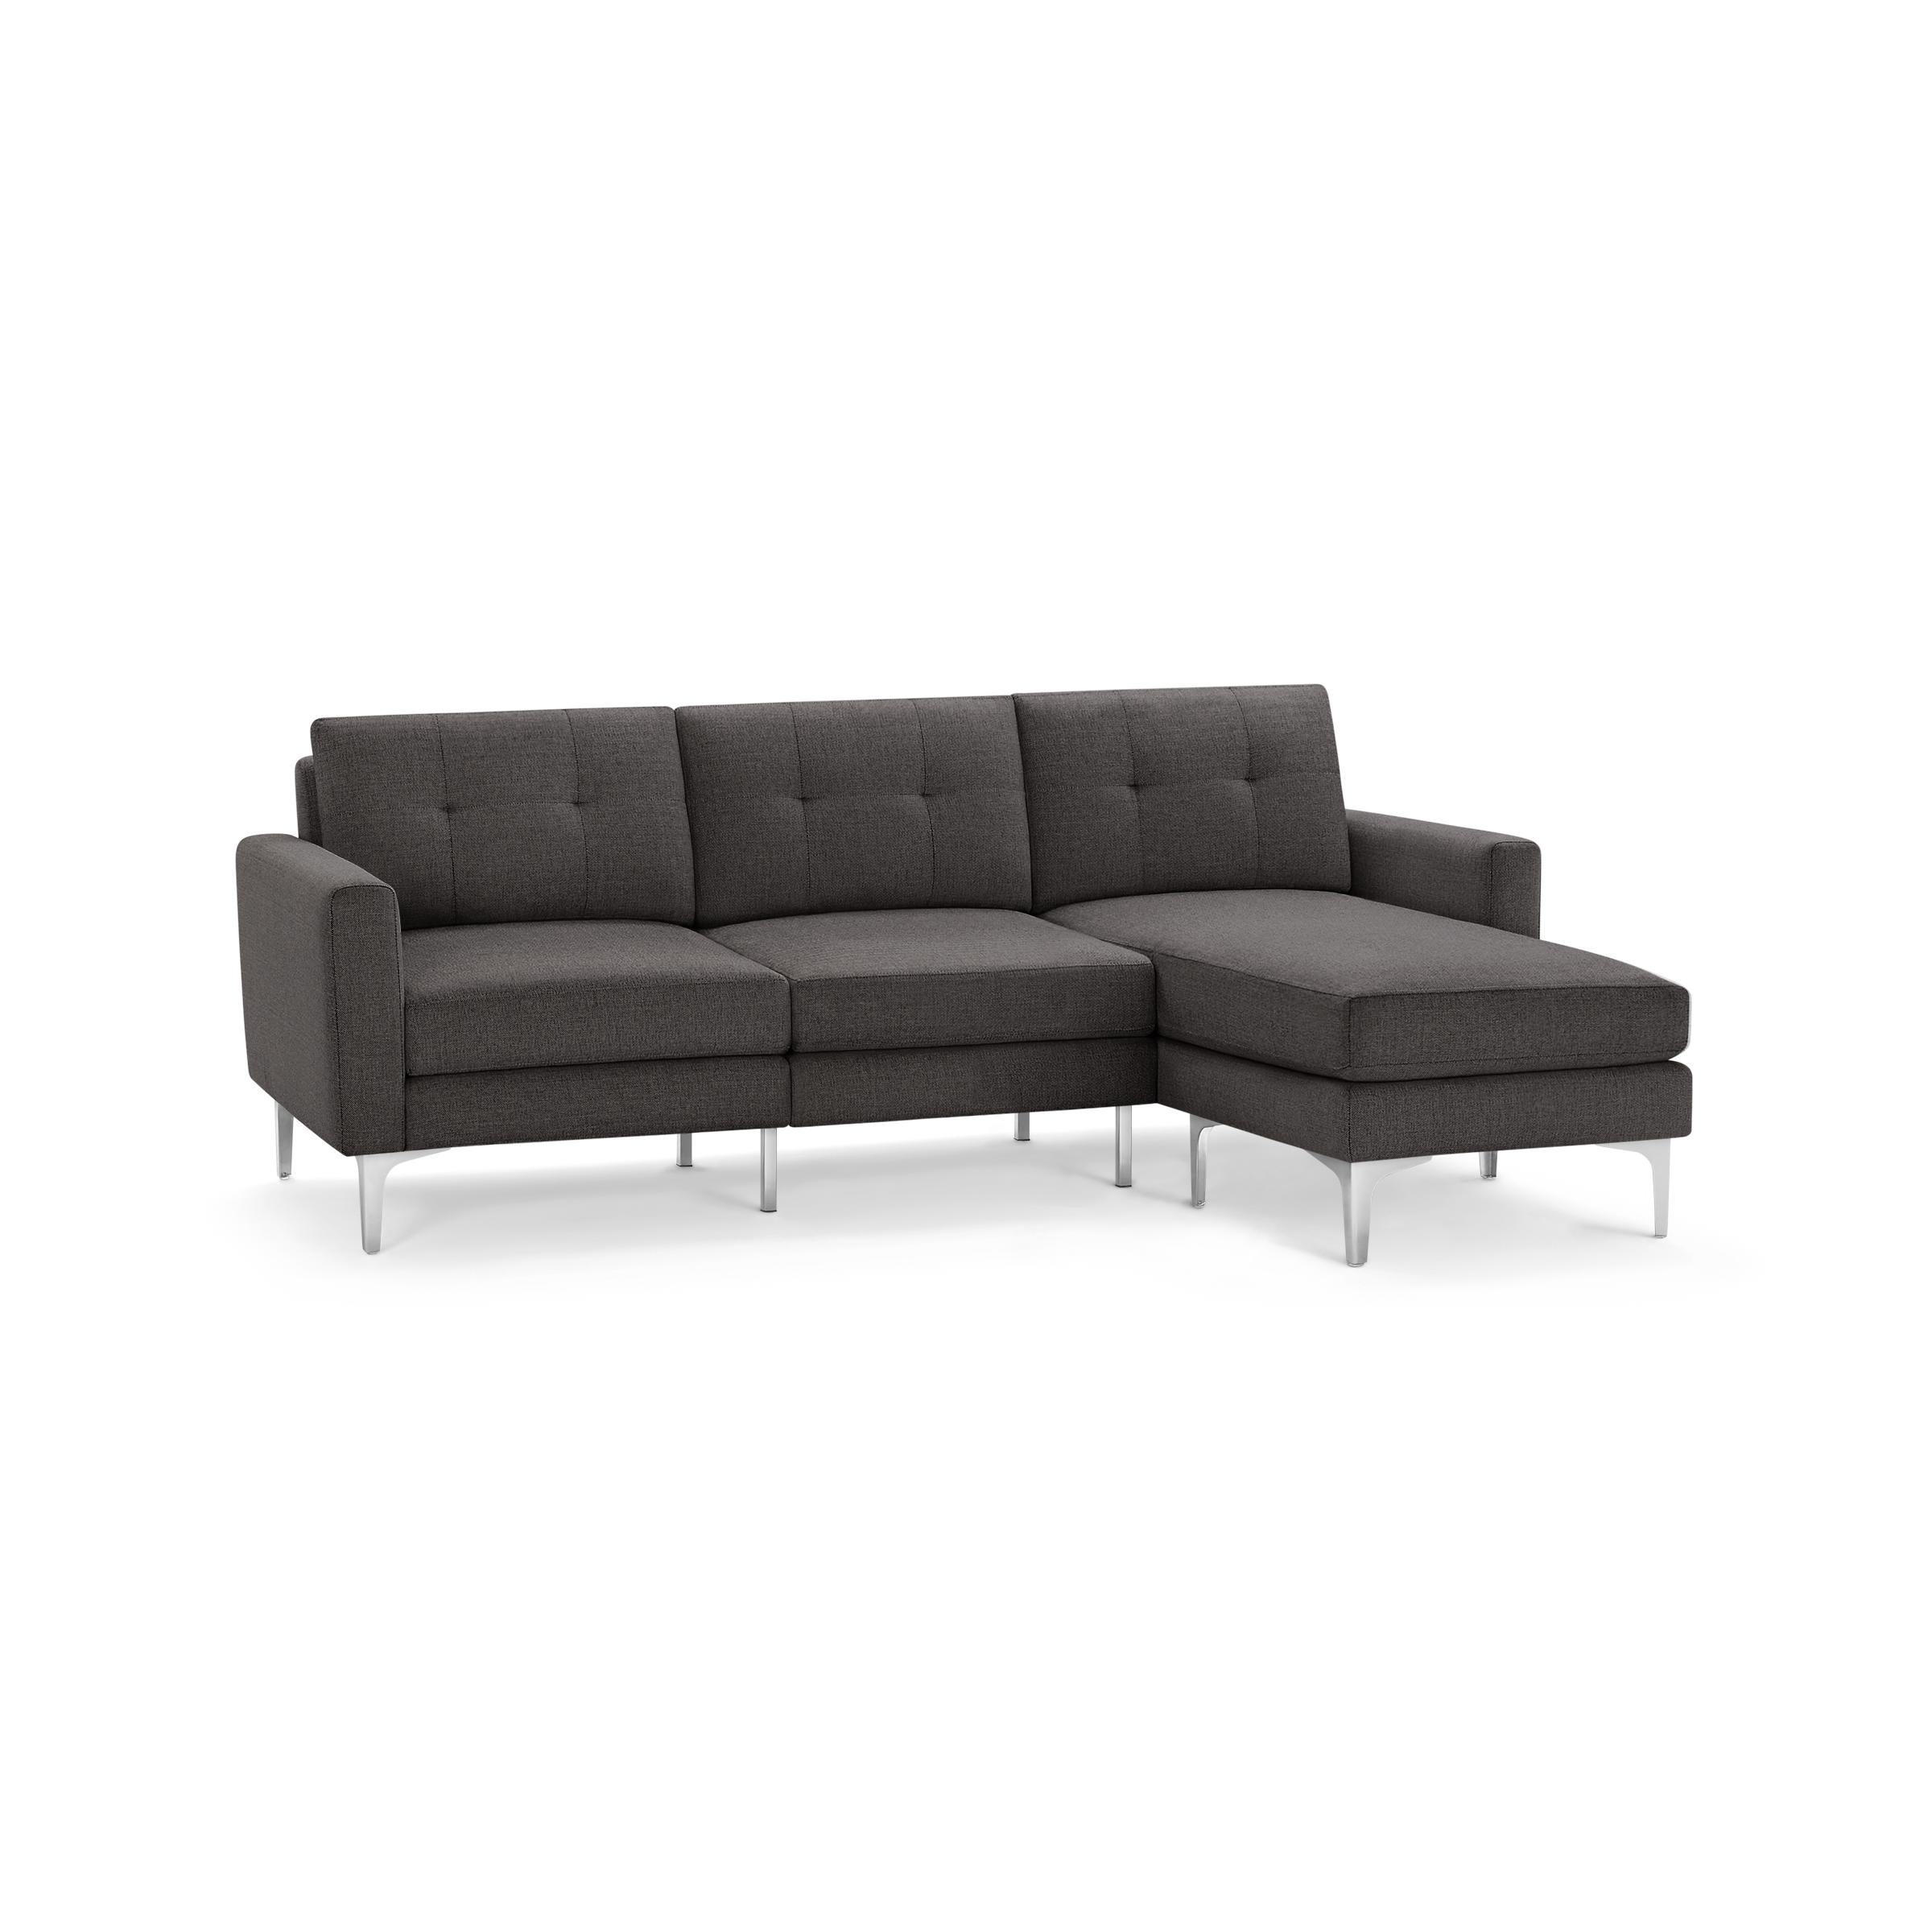 Nomad Sofa Sectional in Charcoal, Chrome Legs - Image 0